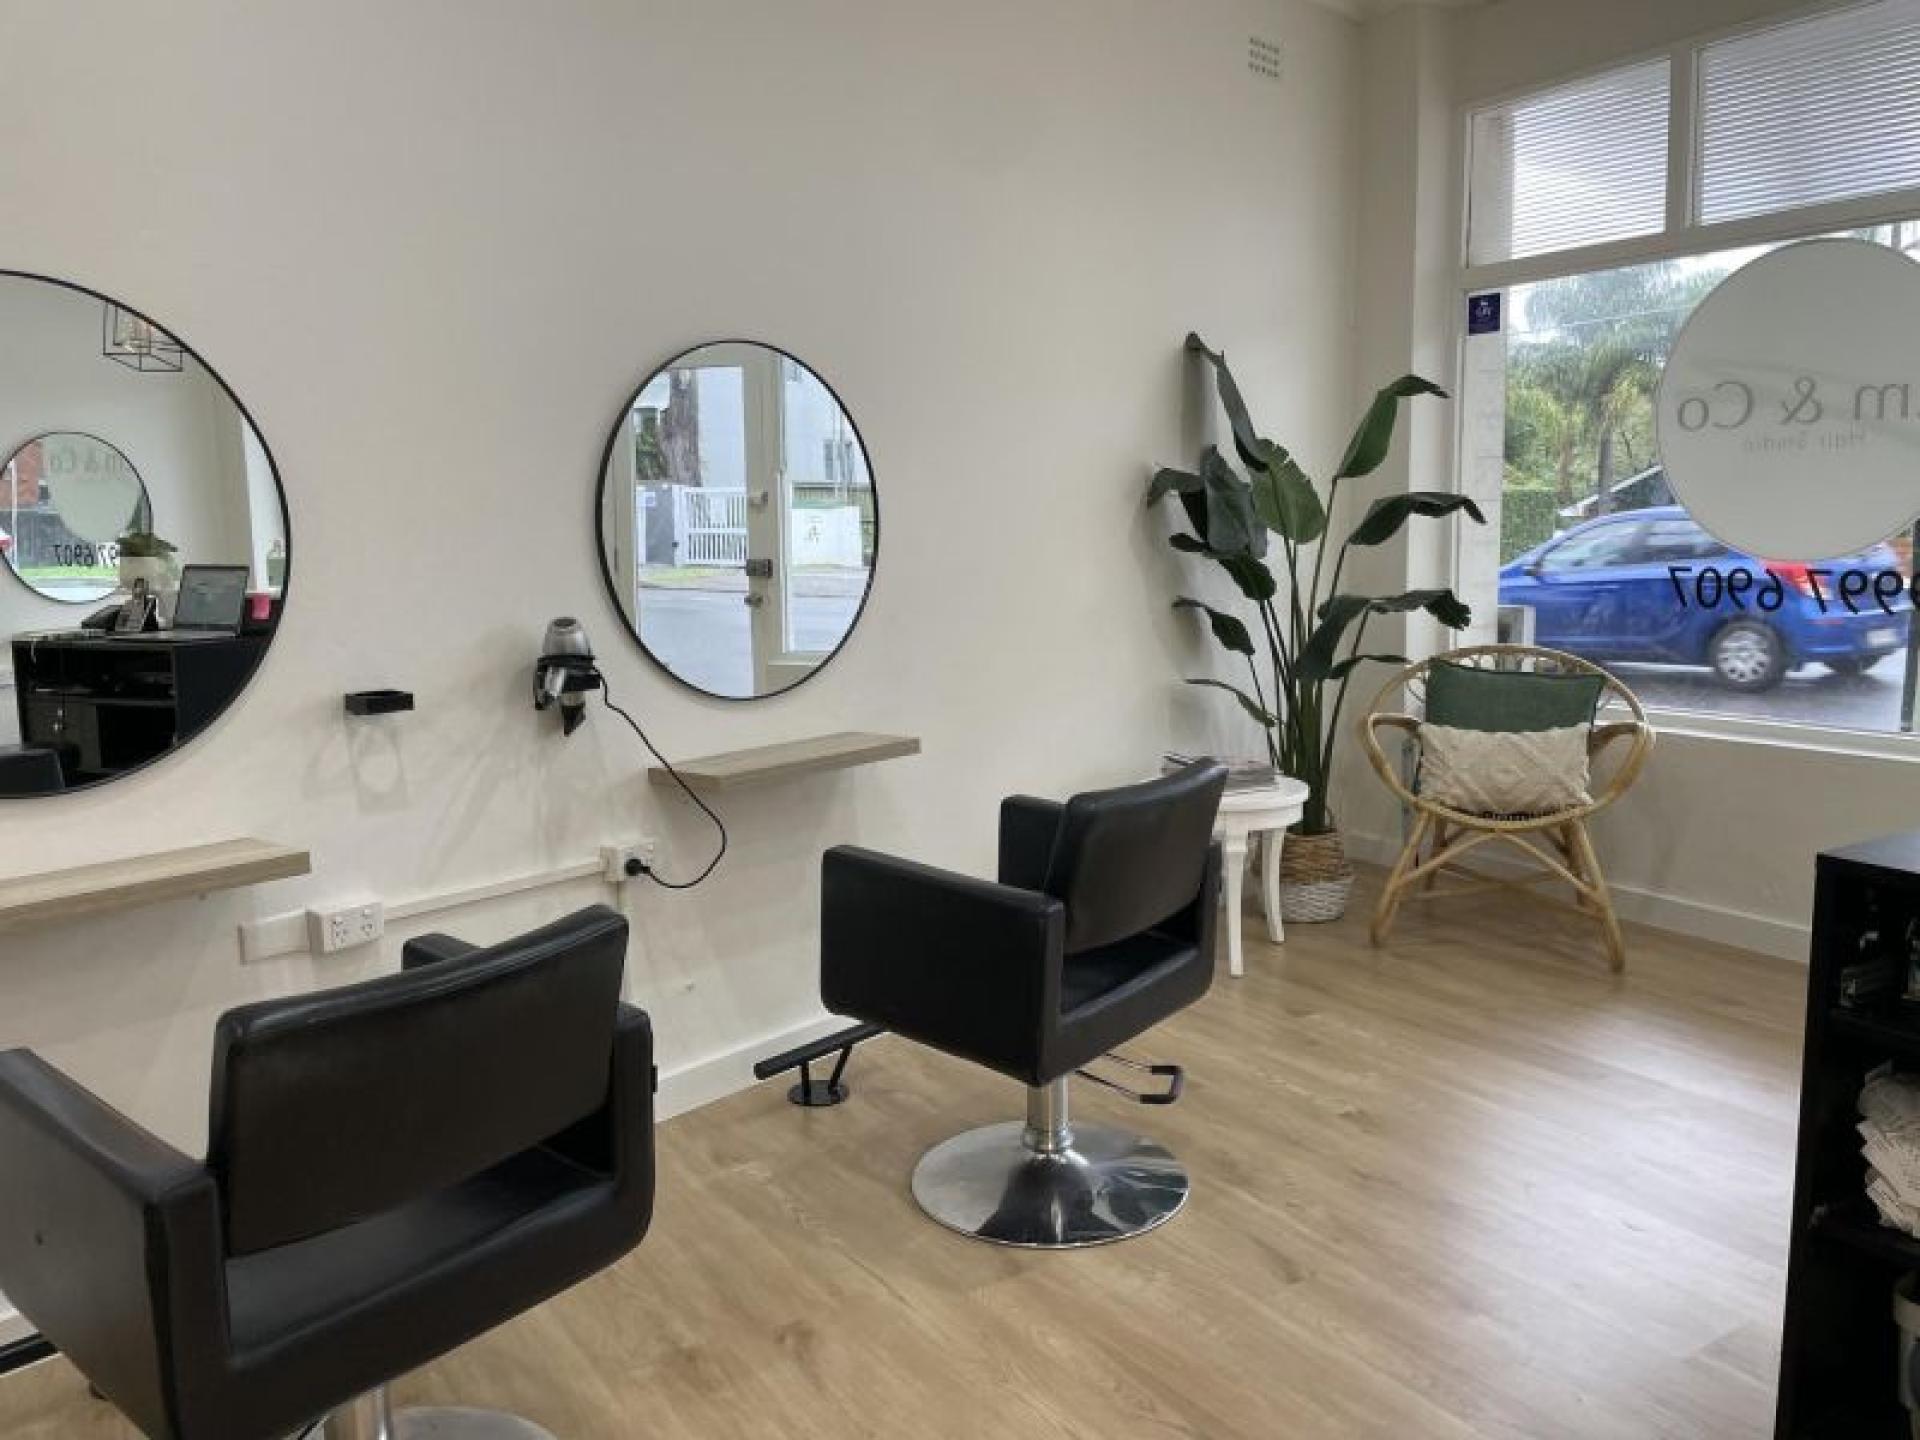 Hair Salon With Impressive New Shop Fit Out... for sale in Newport New  South Wales | Bsale ID 594407